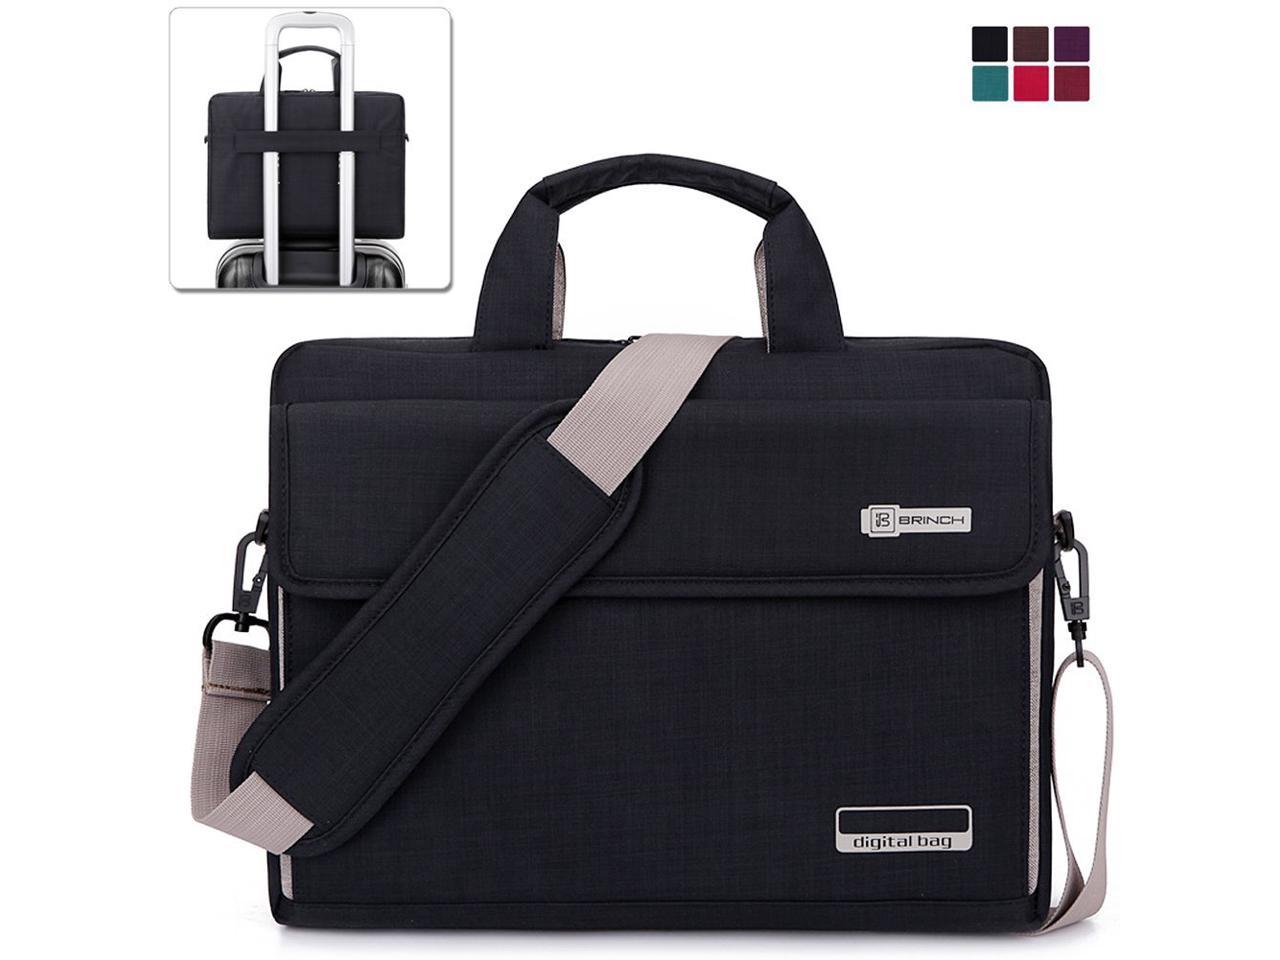 13.3 14.5 Inch Protective Nylon Laptop Messenger Bag Crossbody Shoulder Bag Tablet Sleeve Briefcase Carrying Bag Pouch for Macbook Air Pro Acer Asus Dell HP Lenovo Notebook Tablet and Laptop White